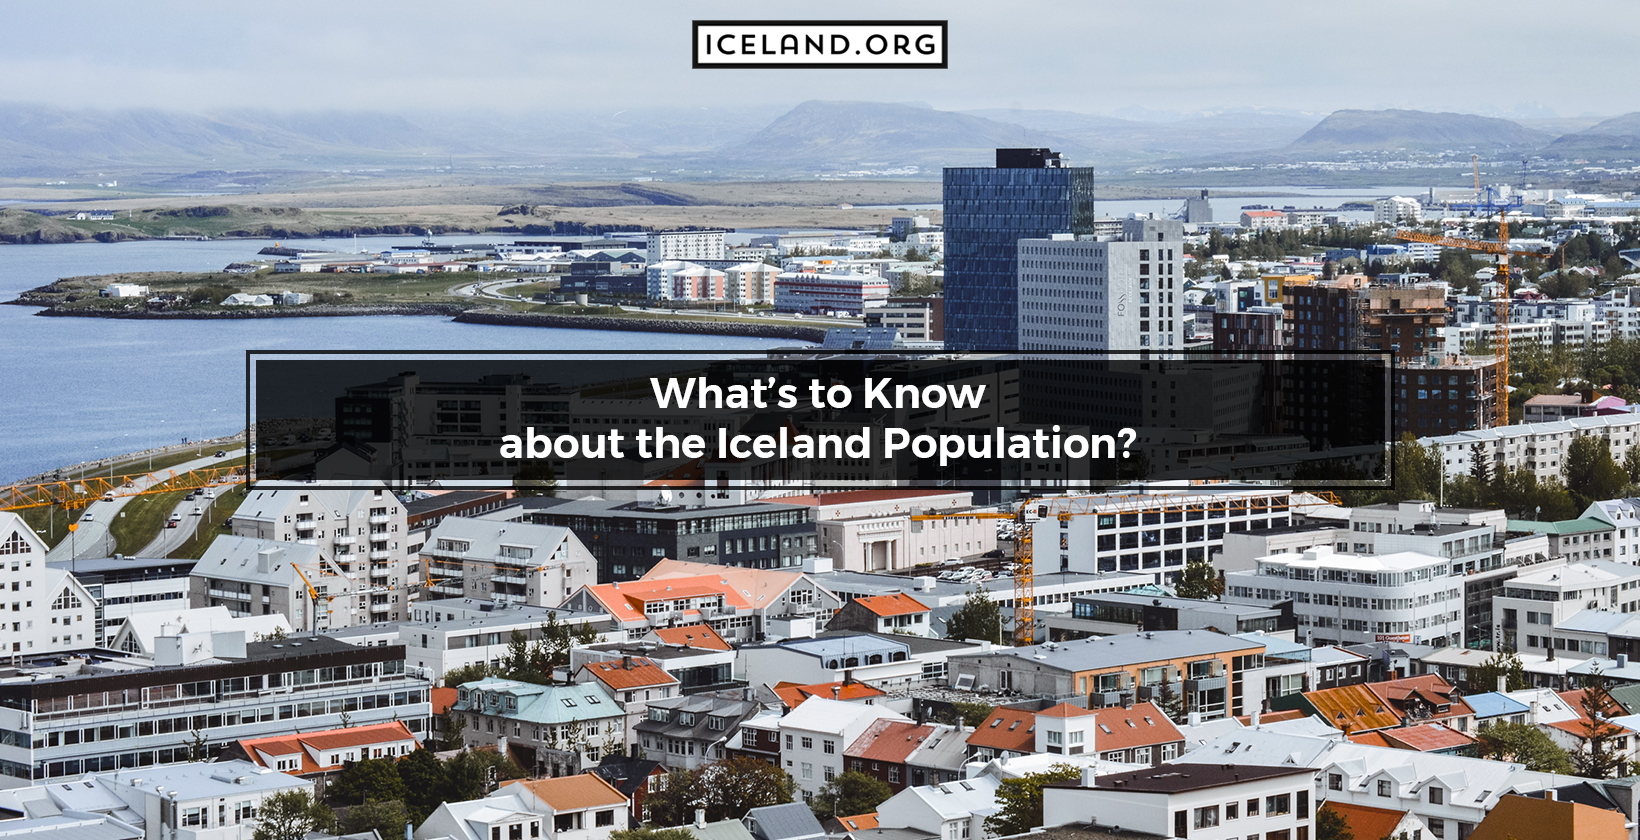 What's to Know about the Iceland Population?